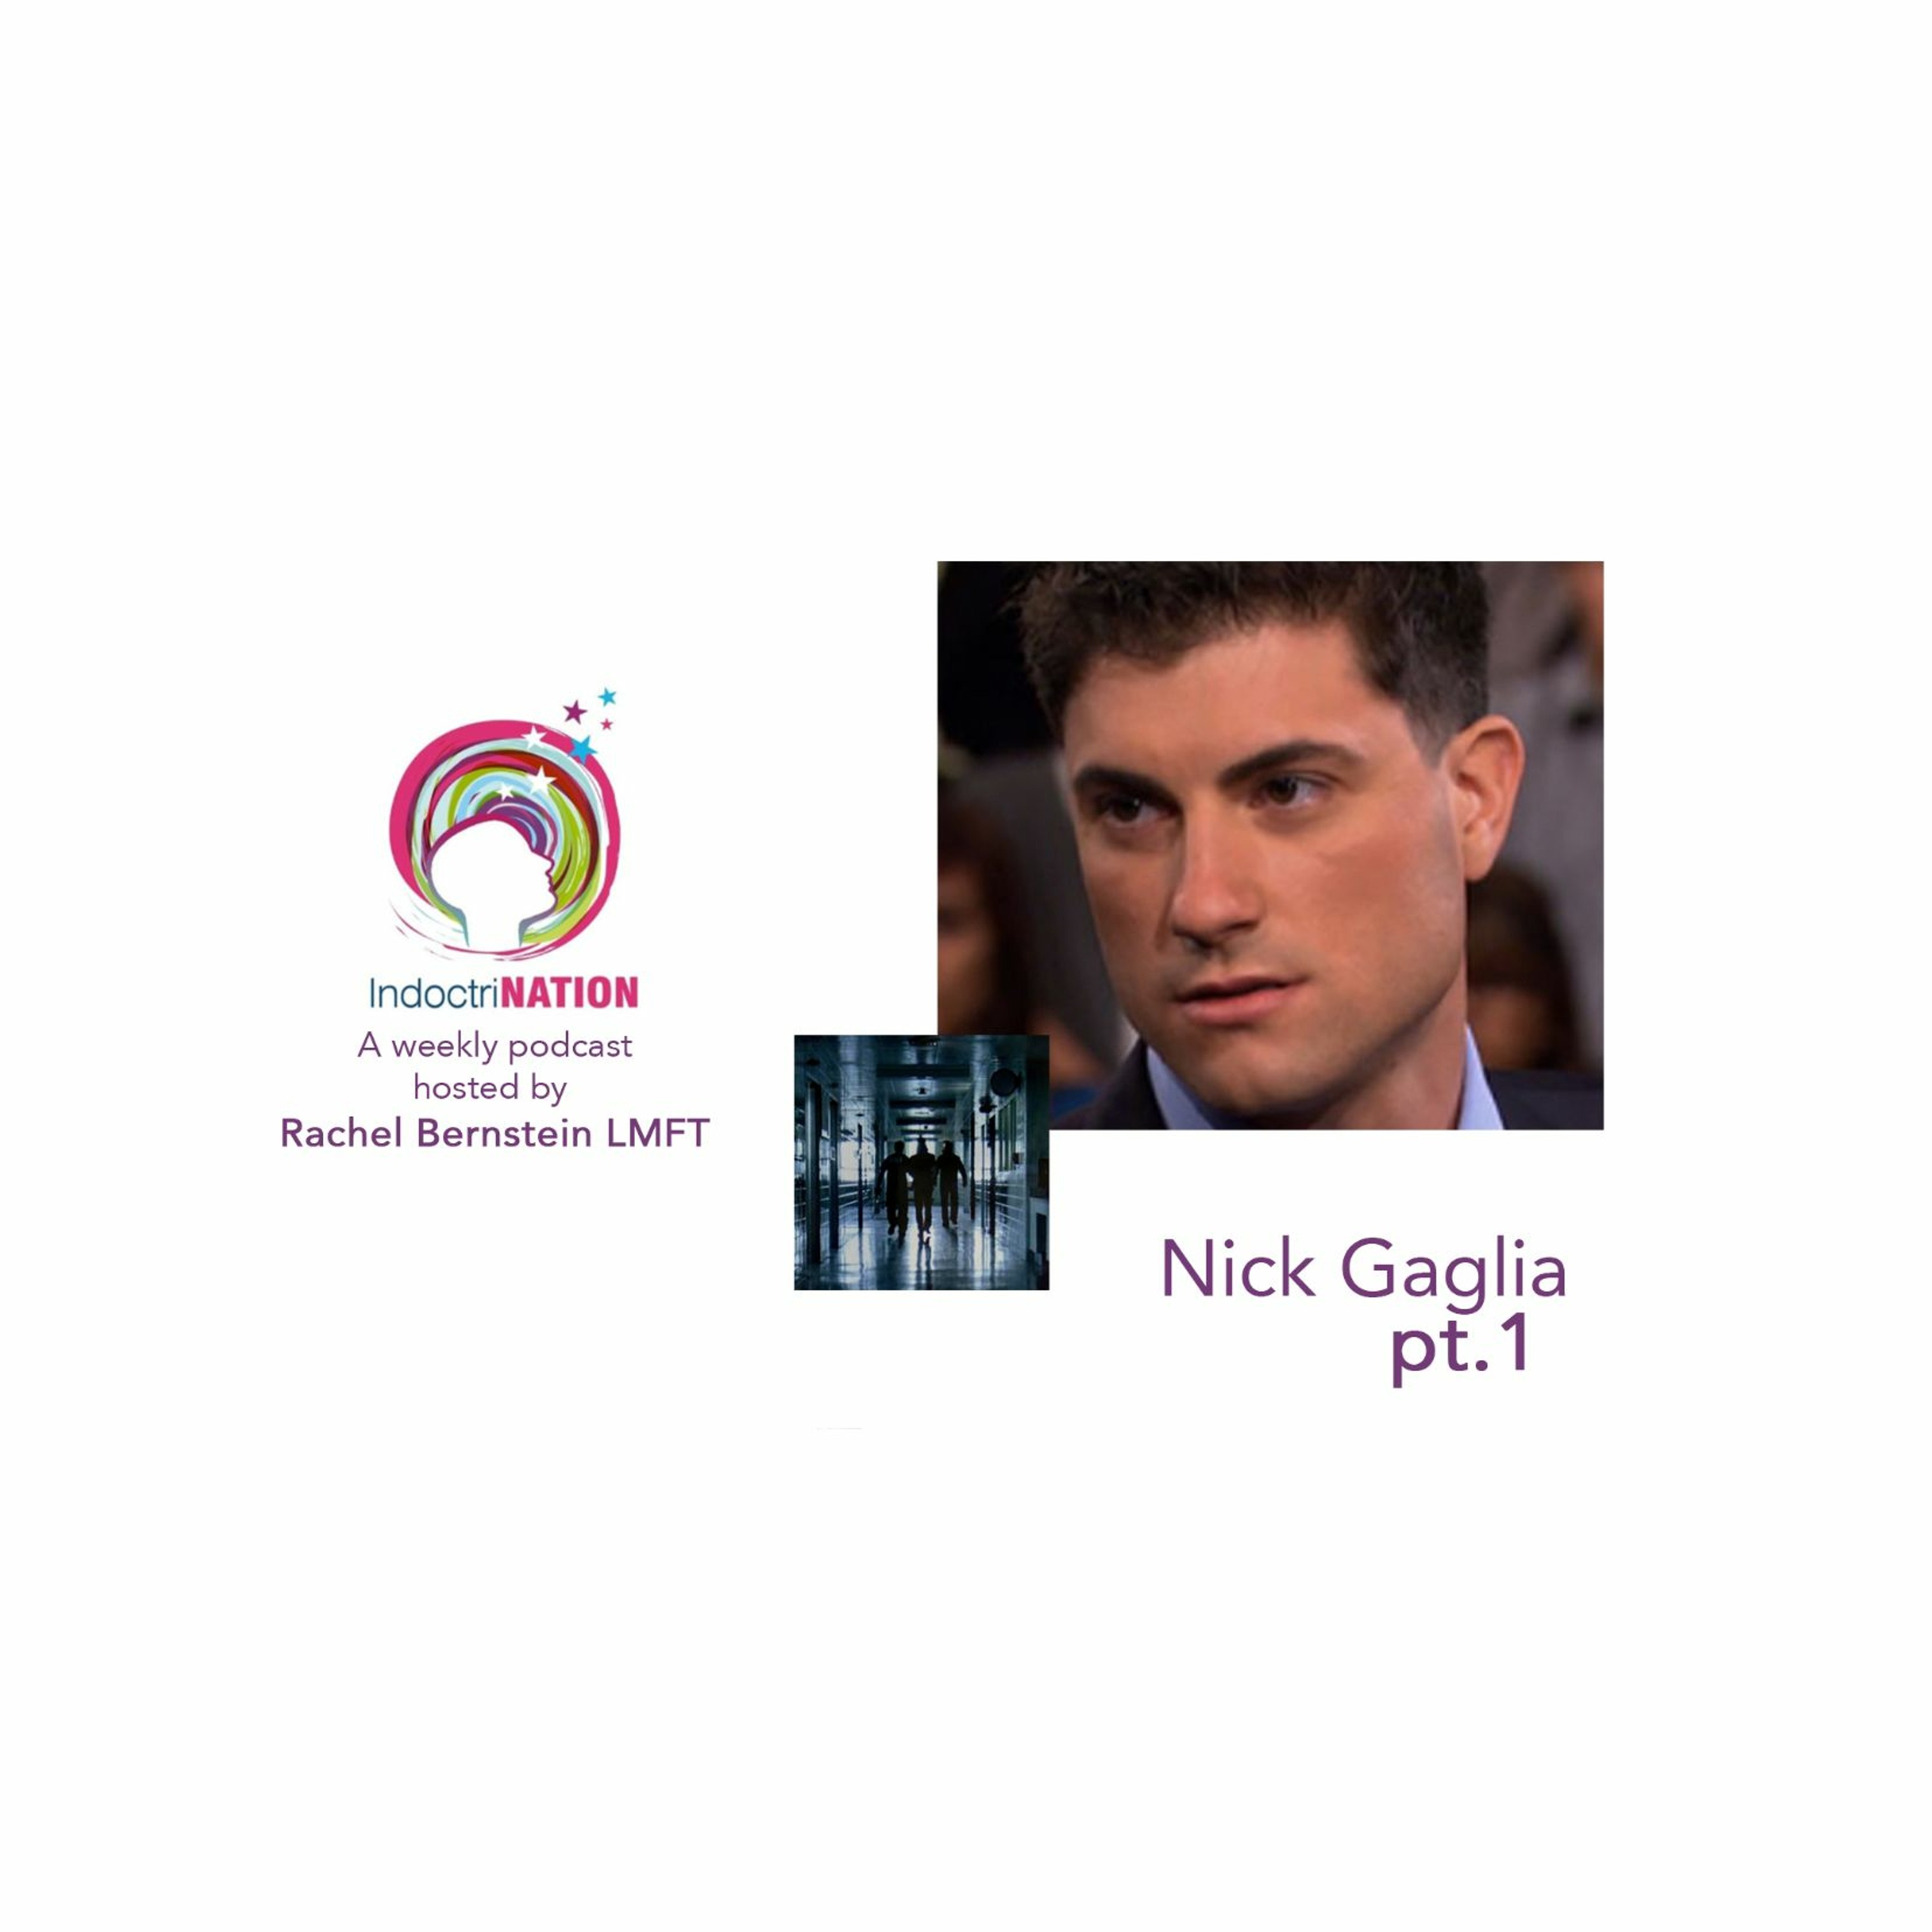 If You Leave, You're Going To Die w/ Nick Gaglia, treatment center survivor - S3E4pt1 Image